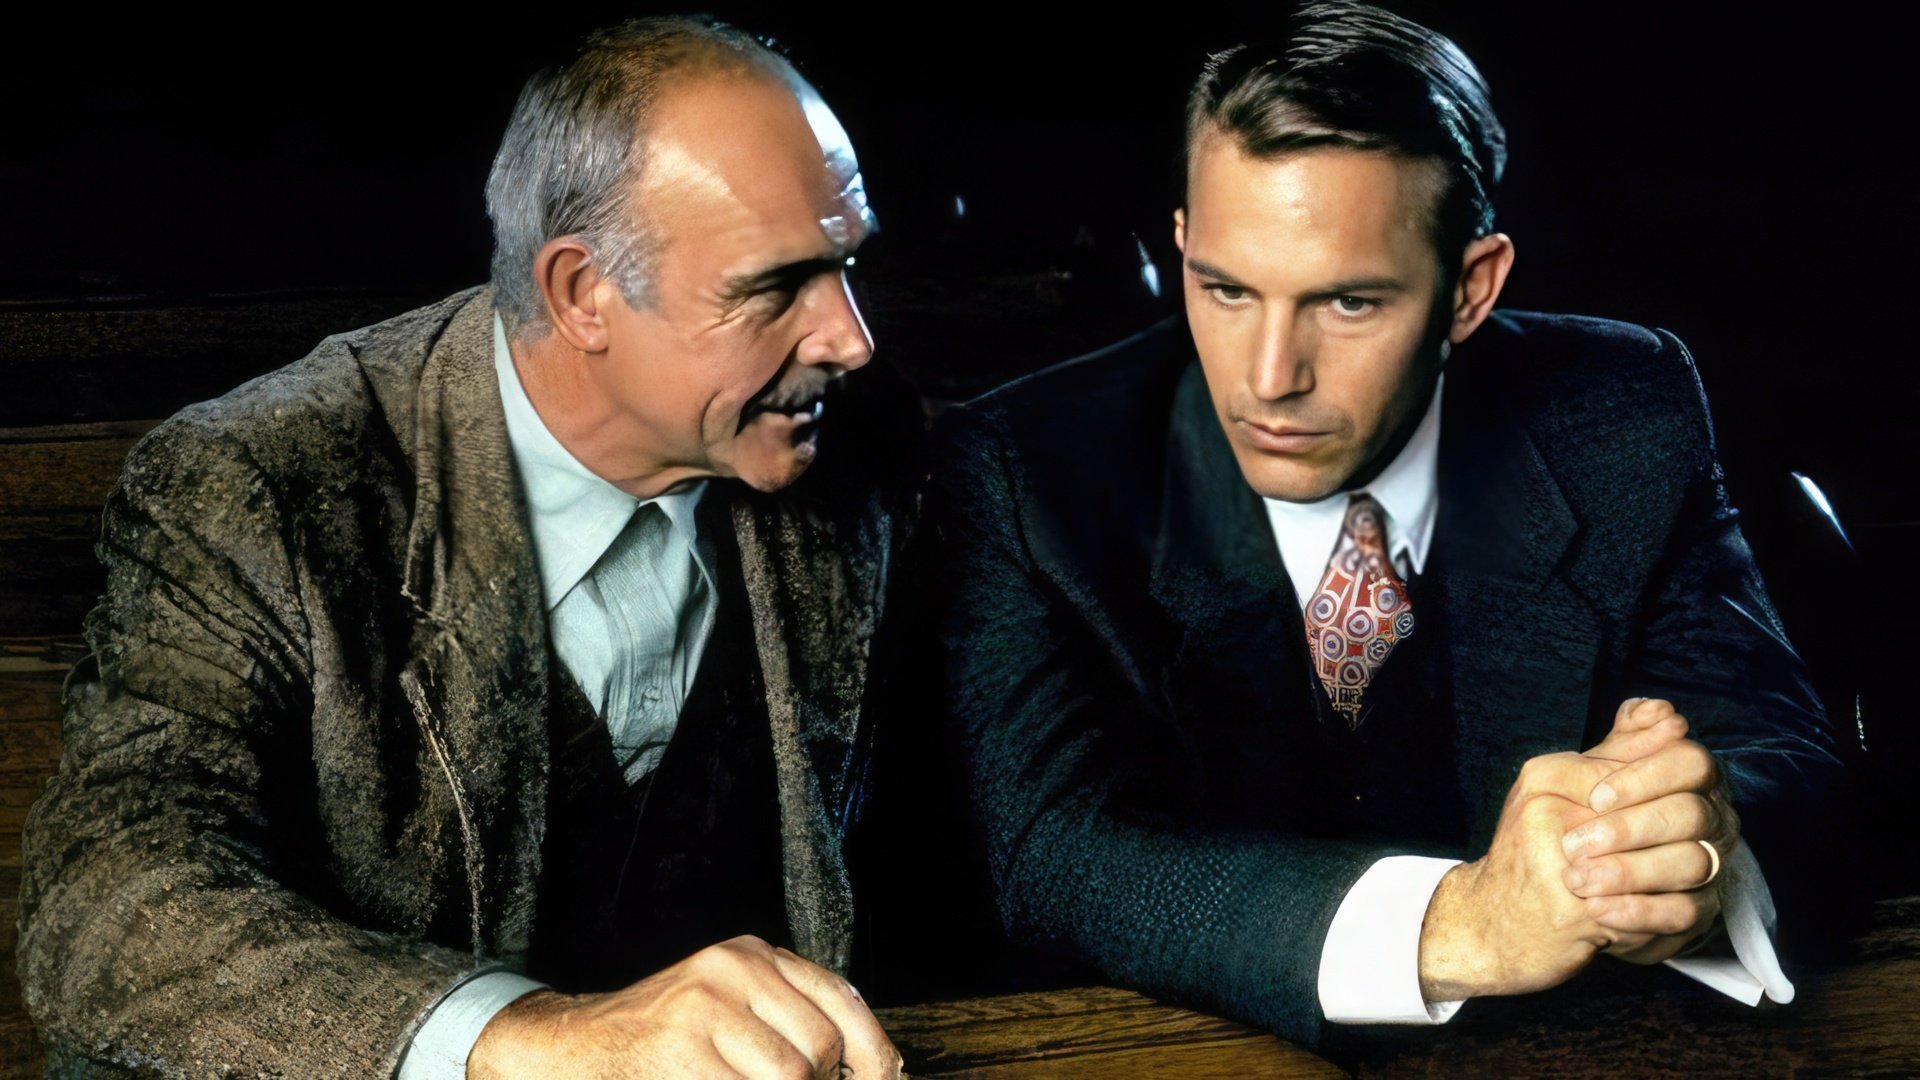 Sean Connery and Kevin Costner in 'The Untouchables'